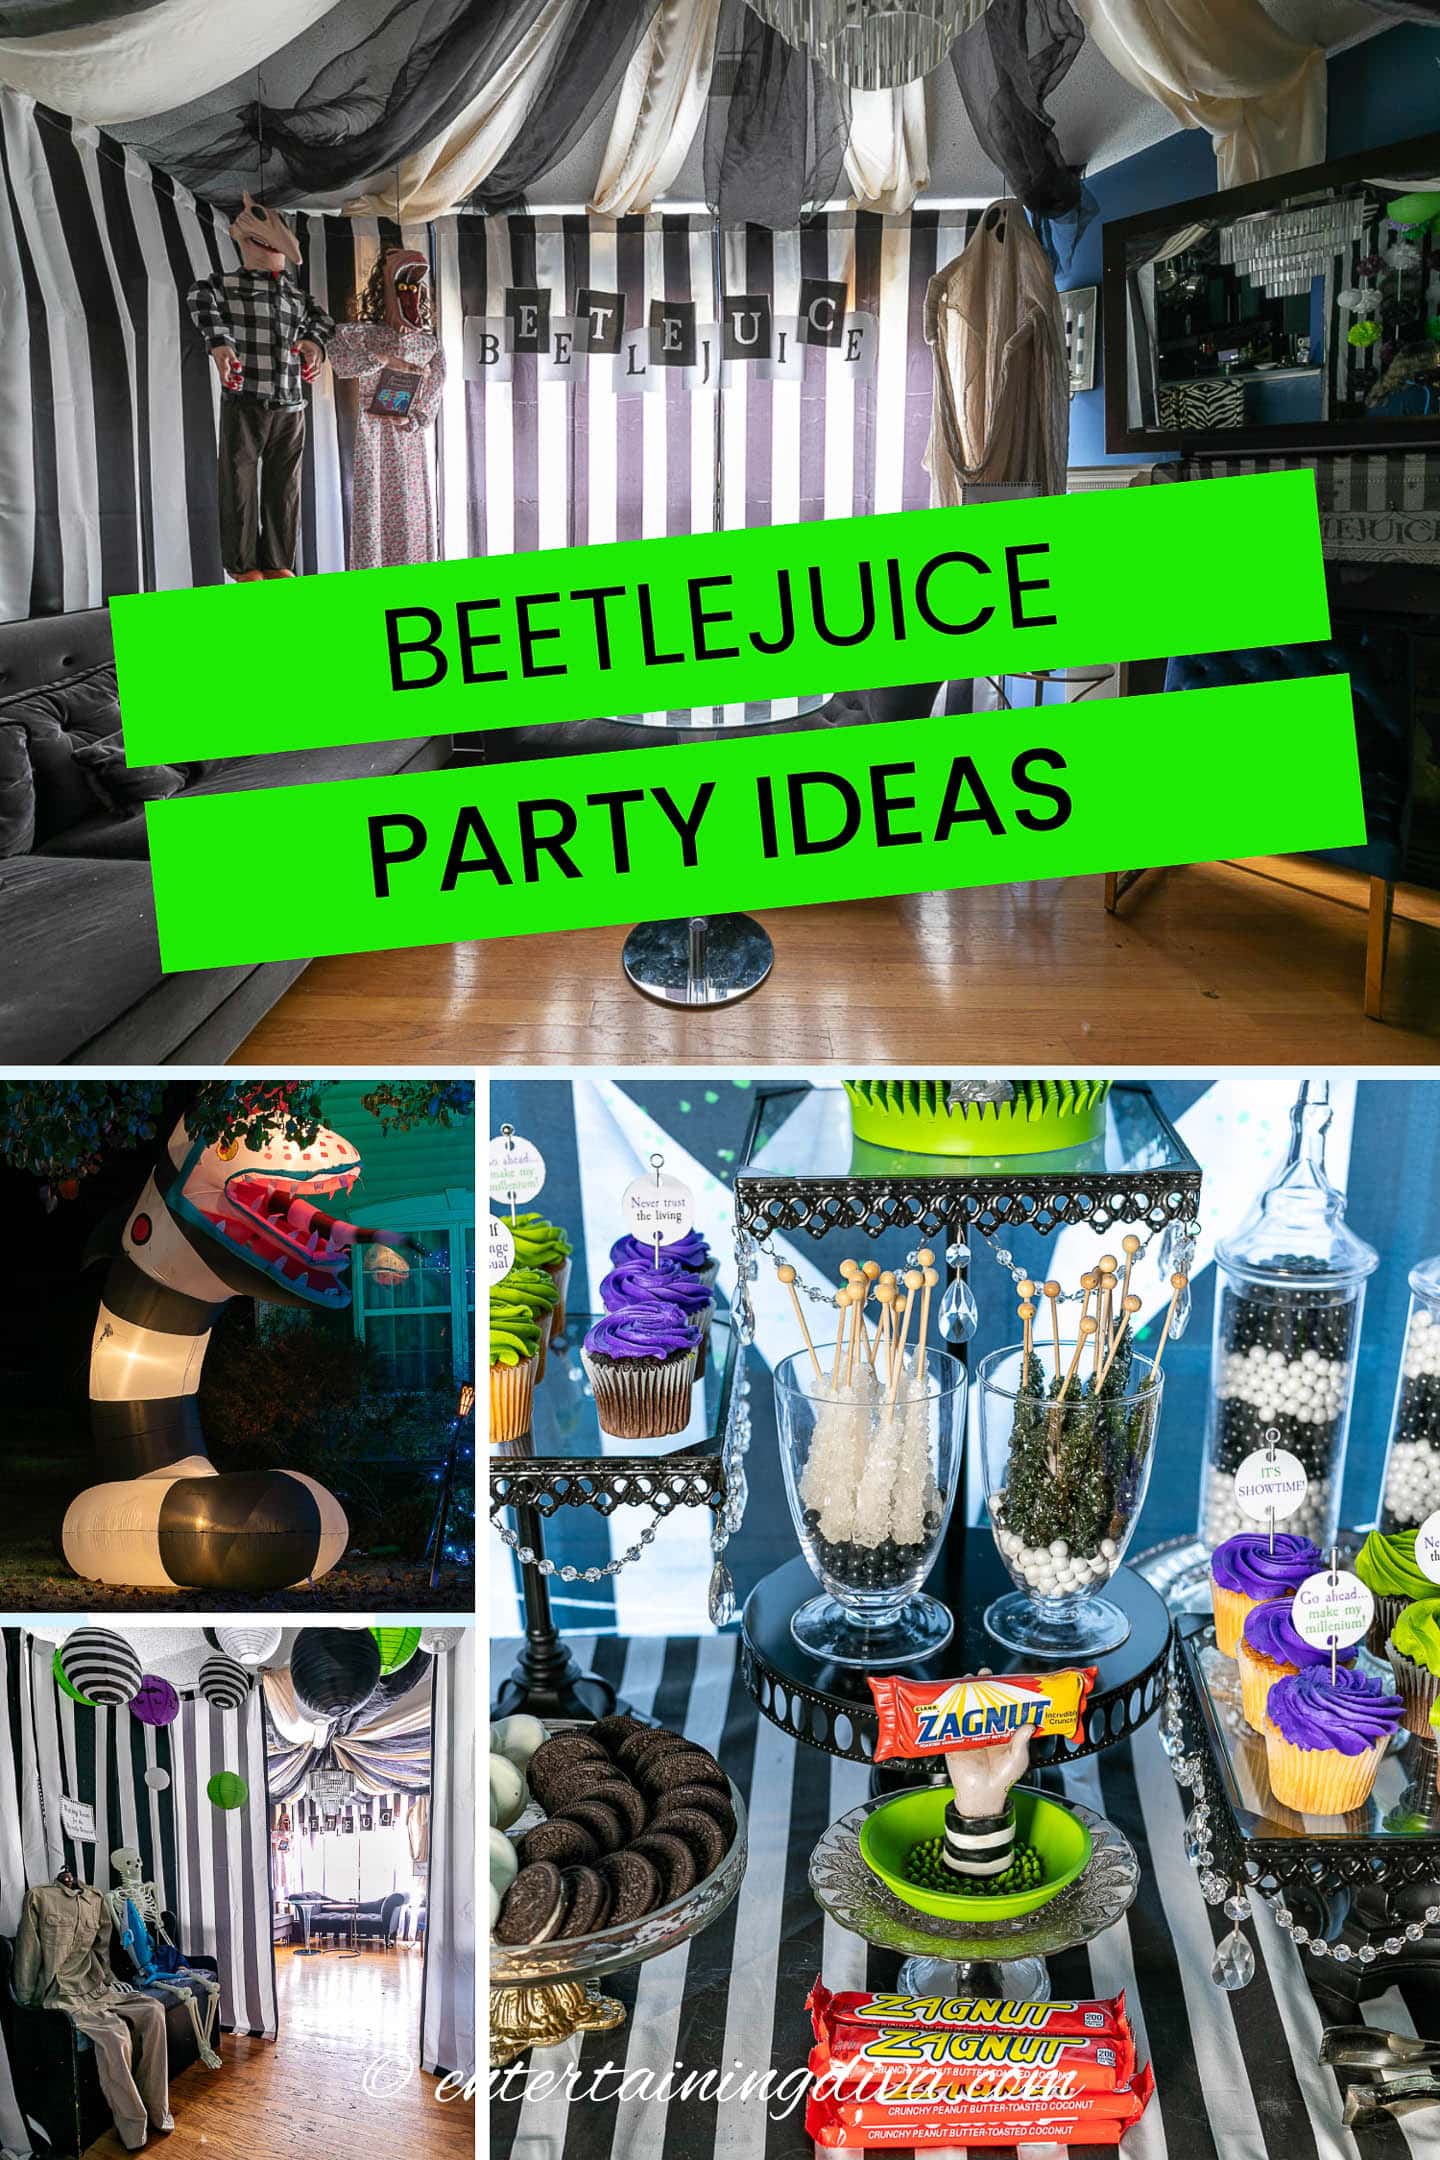 Beetlejuice-themed party ideas.